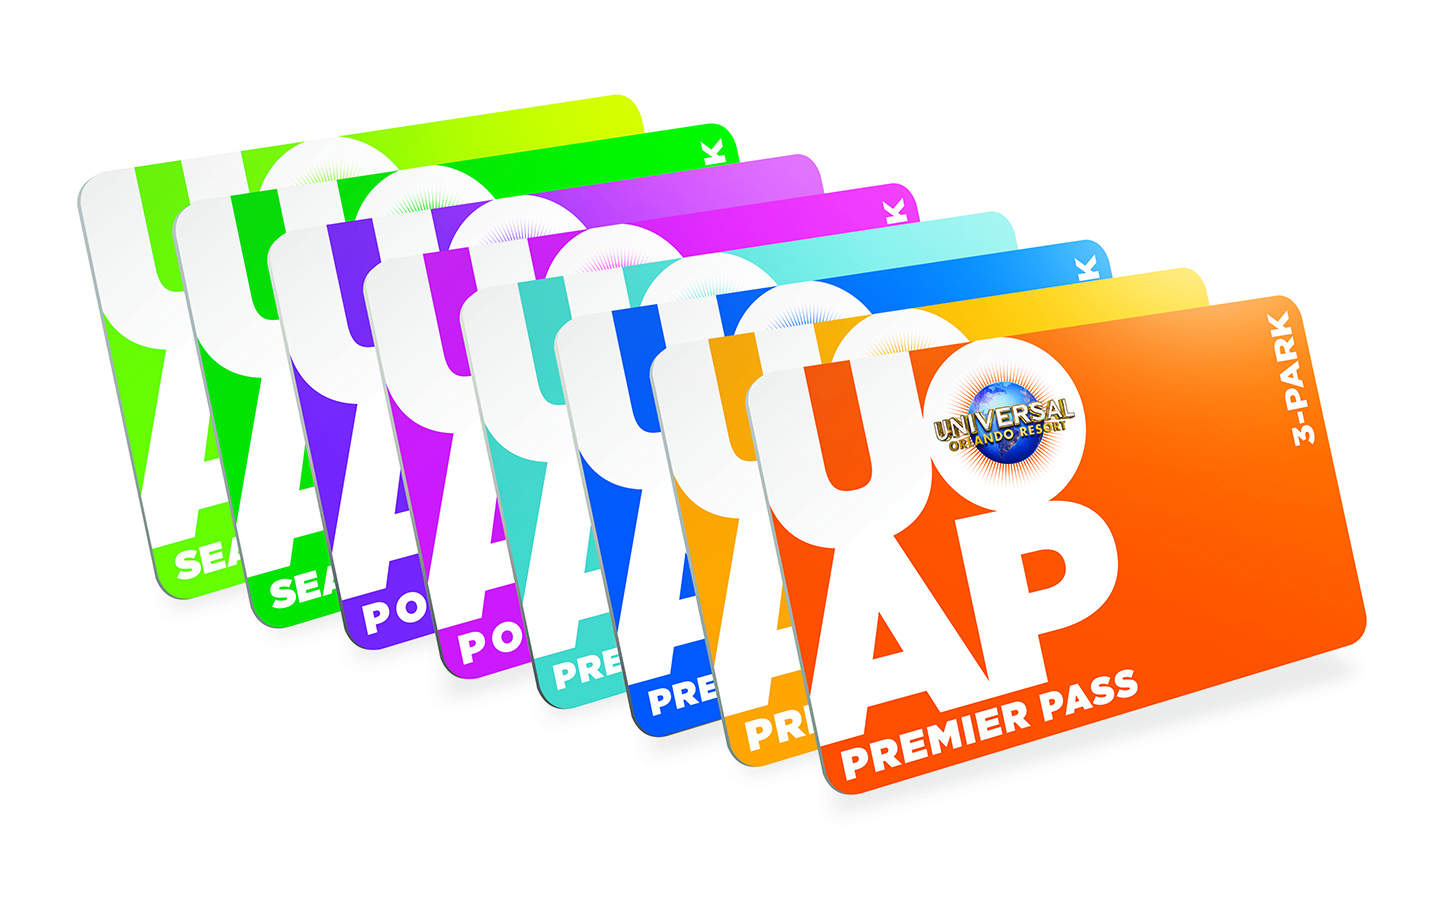 Universal Orlando Annual Passes – complete insider's guide